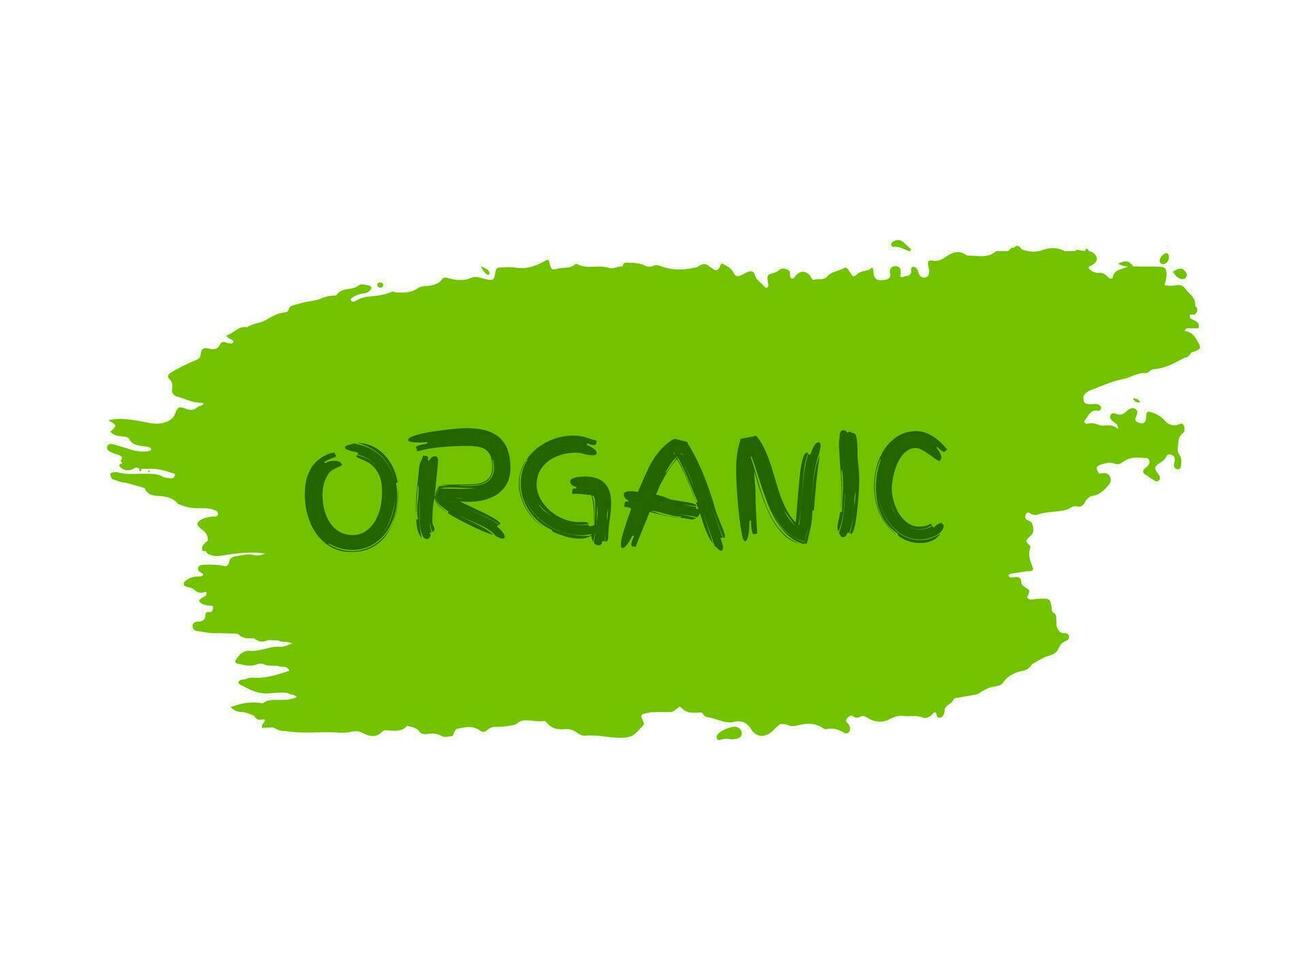 Green natural bio label. The inscription Organic on green label on hand drawn stains. Vector illustration